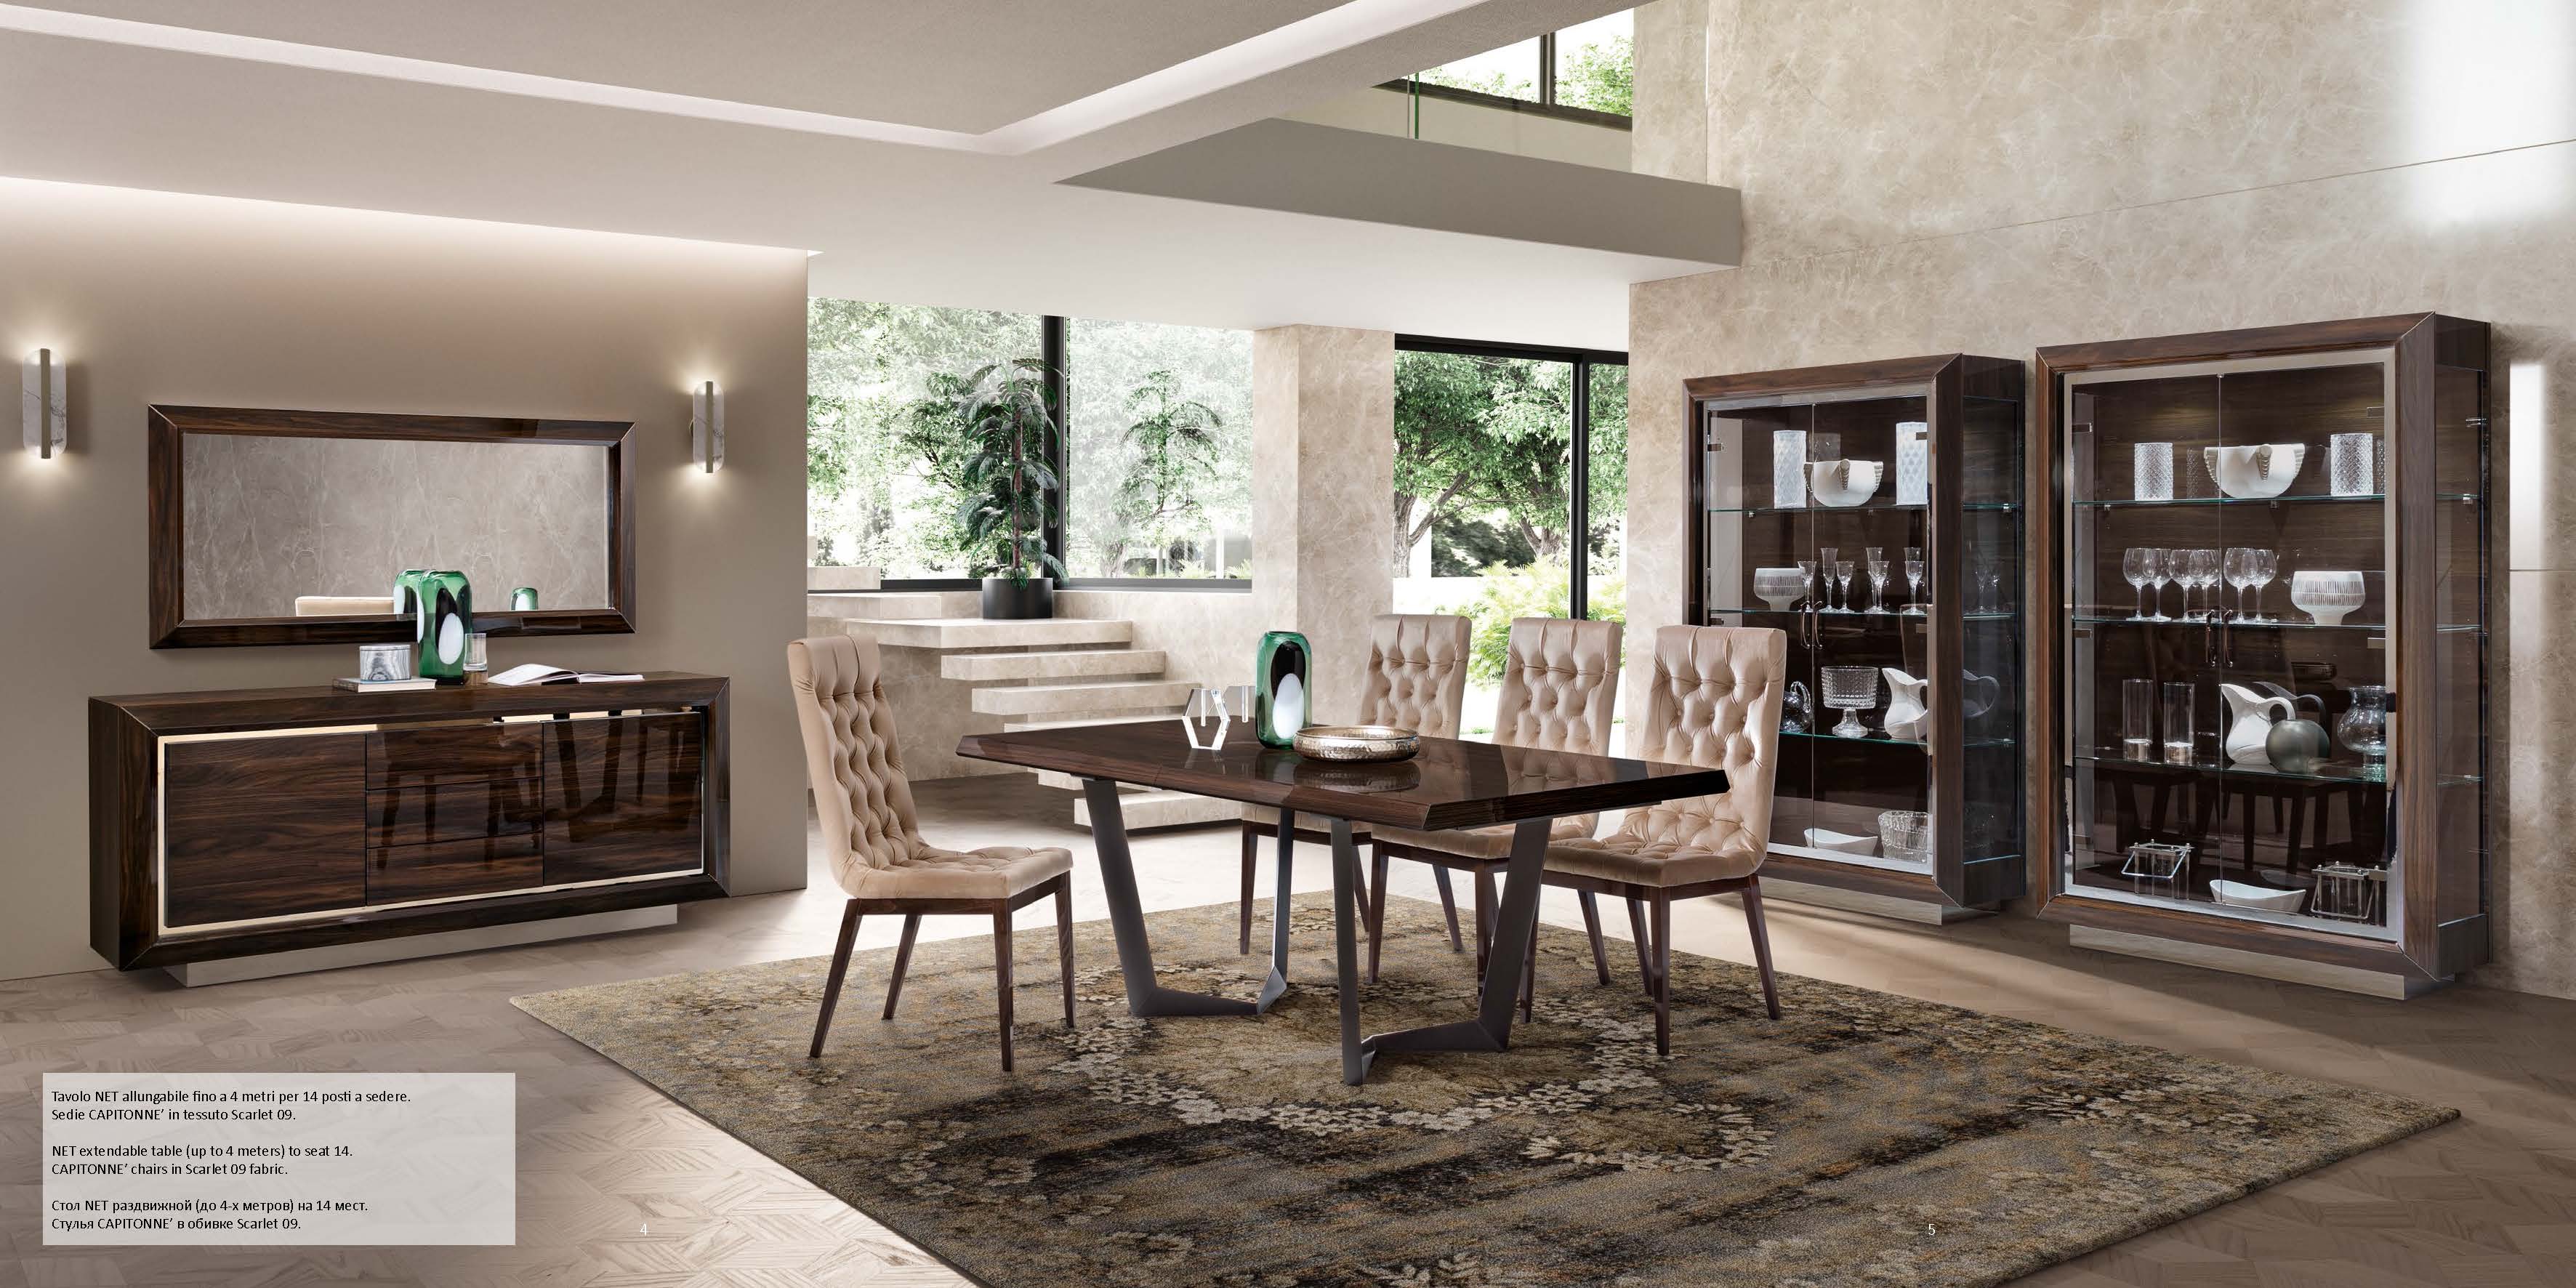 Brands Camel Modum Collection, Italy Elite Day Walnut Dining Additional items